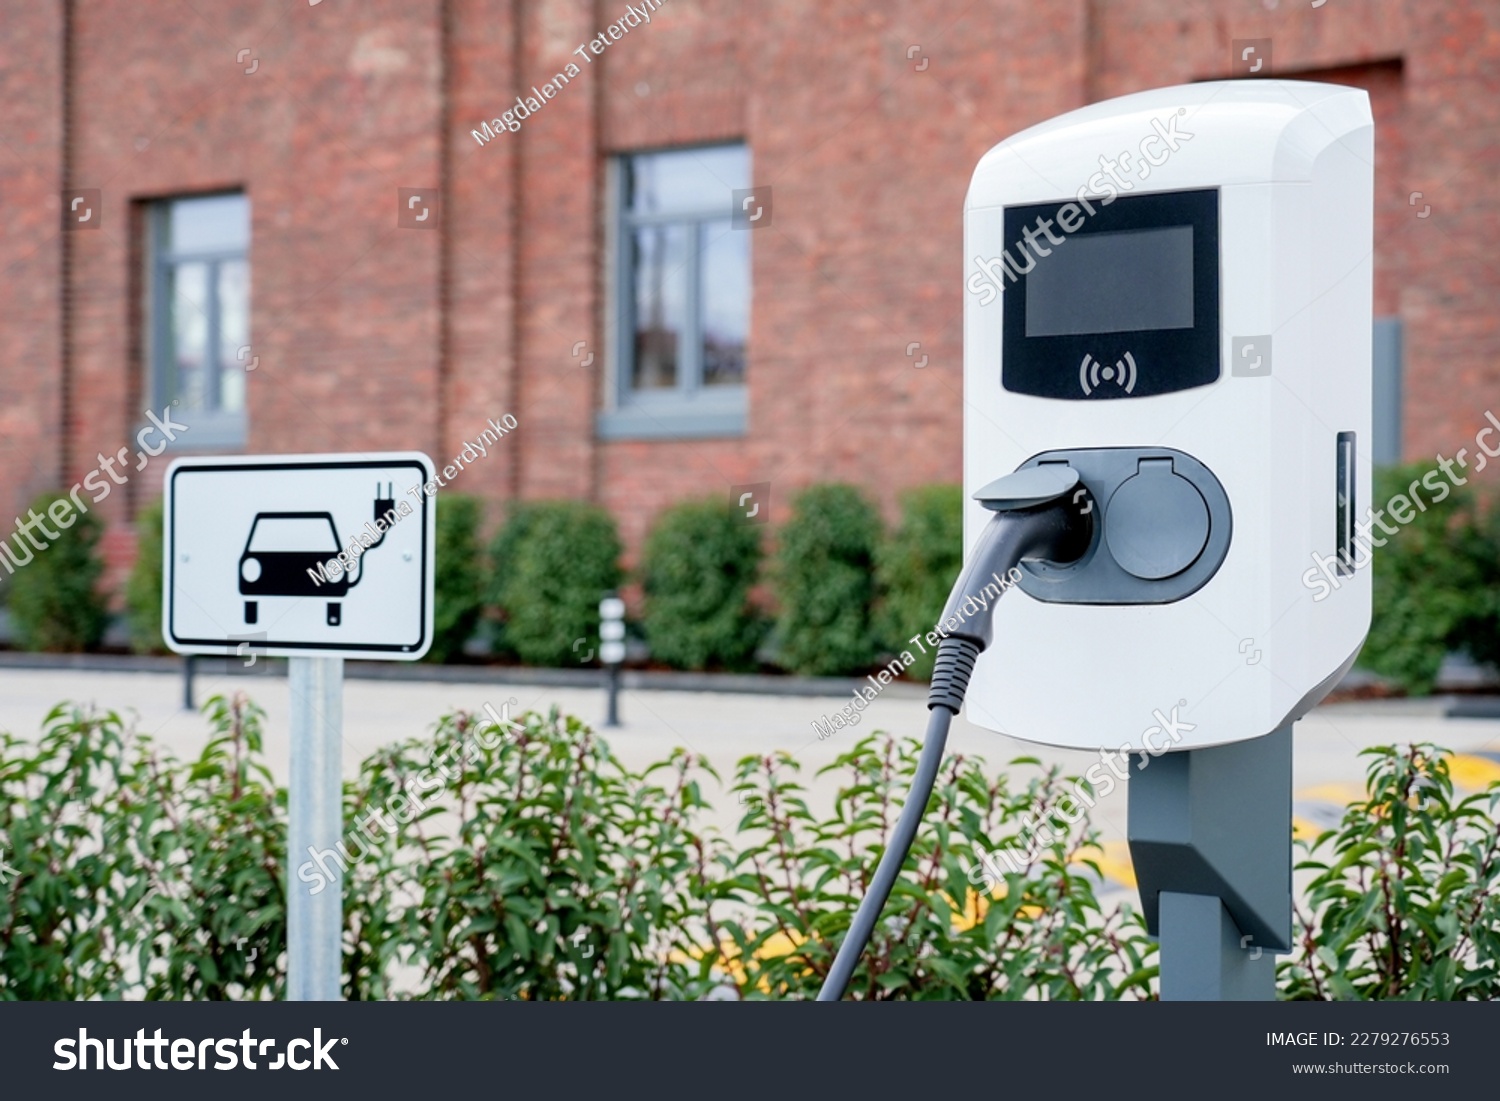 e-car charging station, e-car charge point or electric vehicle supply equipment (EVSE) with information sign electric car public charging point station and charge cable, charging plug parking spaces #2279276553